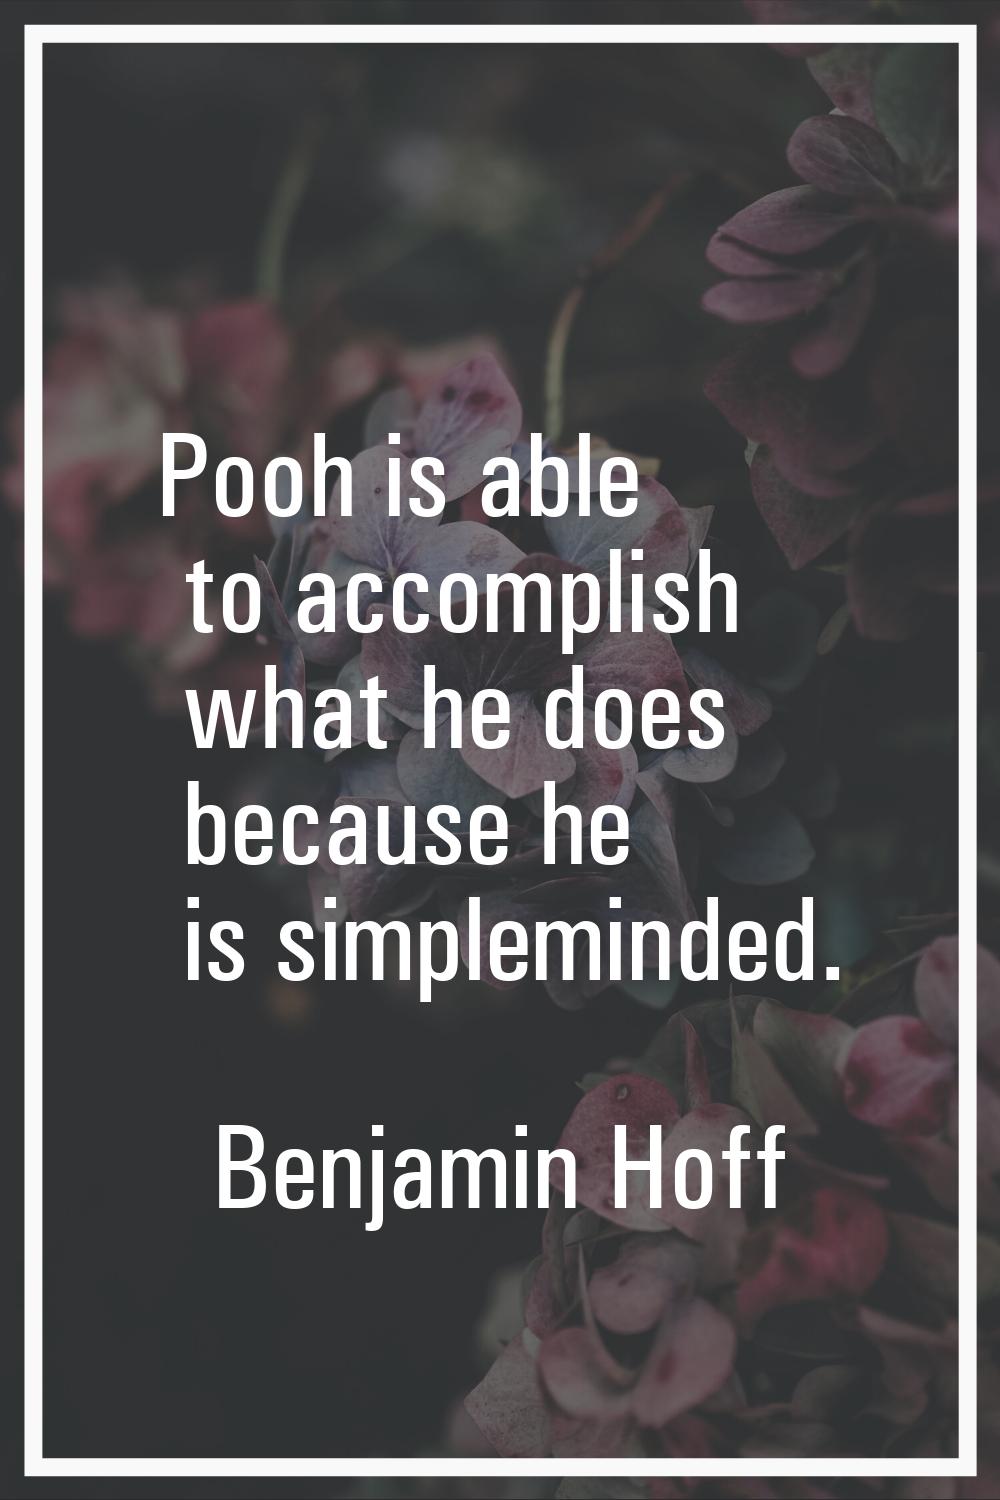 Pooh is able to accomplish what he does because he is simpleminded.